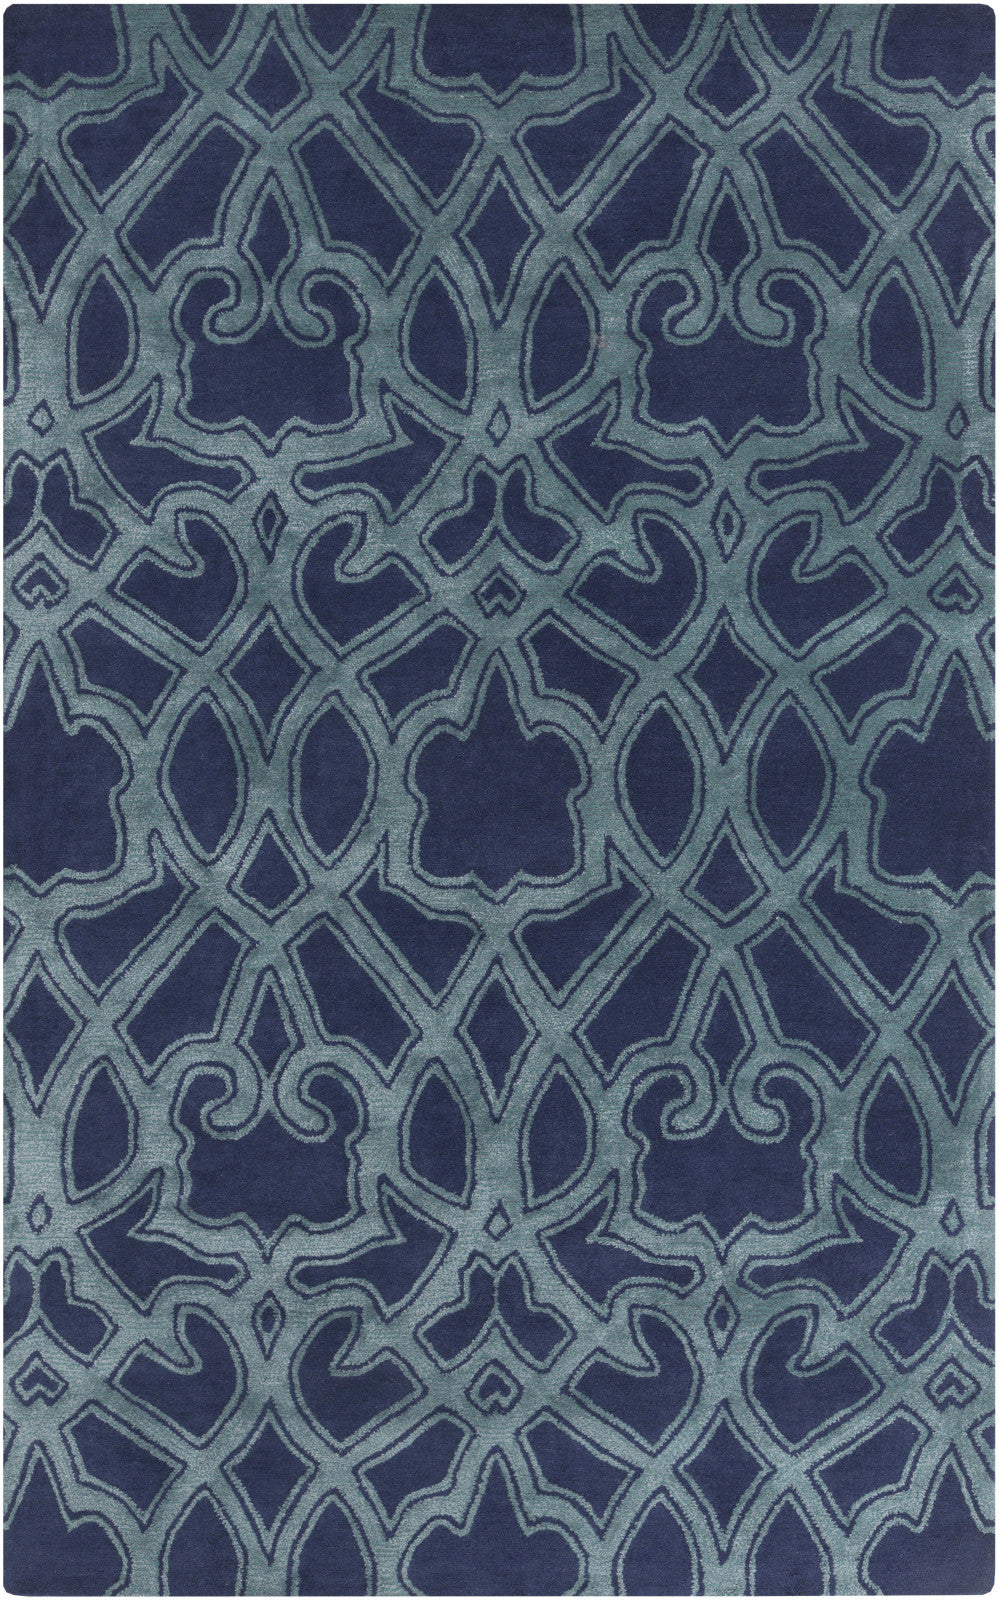 Surya Mount Perry MTP-1022 Area Rug by Florence Broadhurst